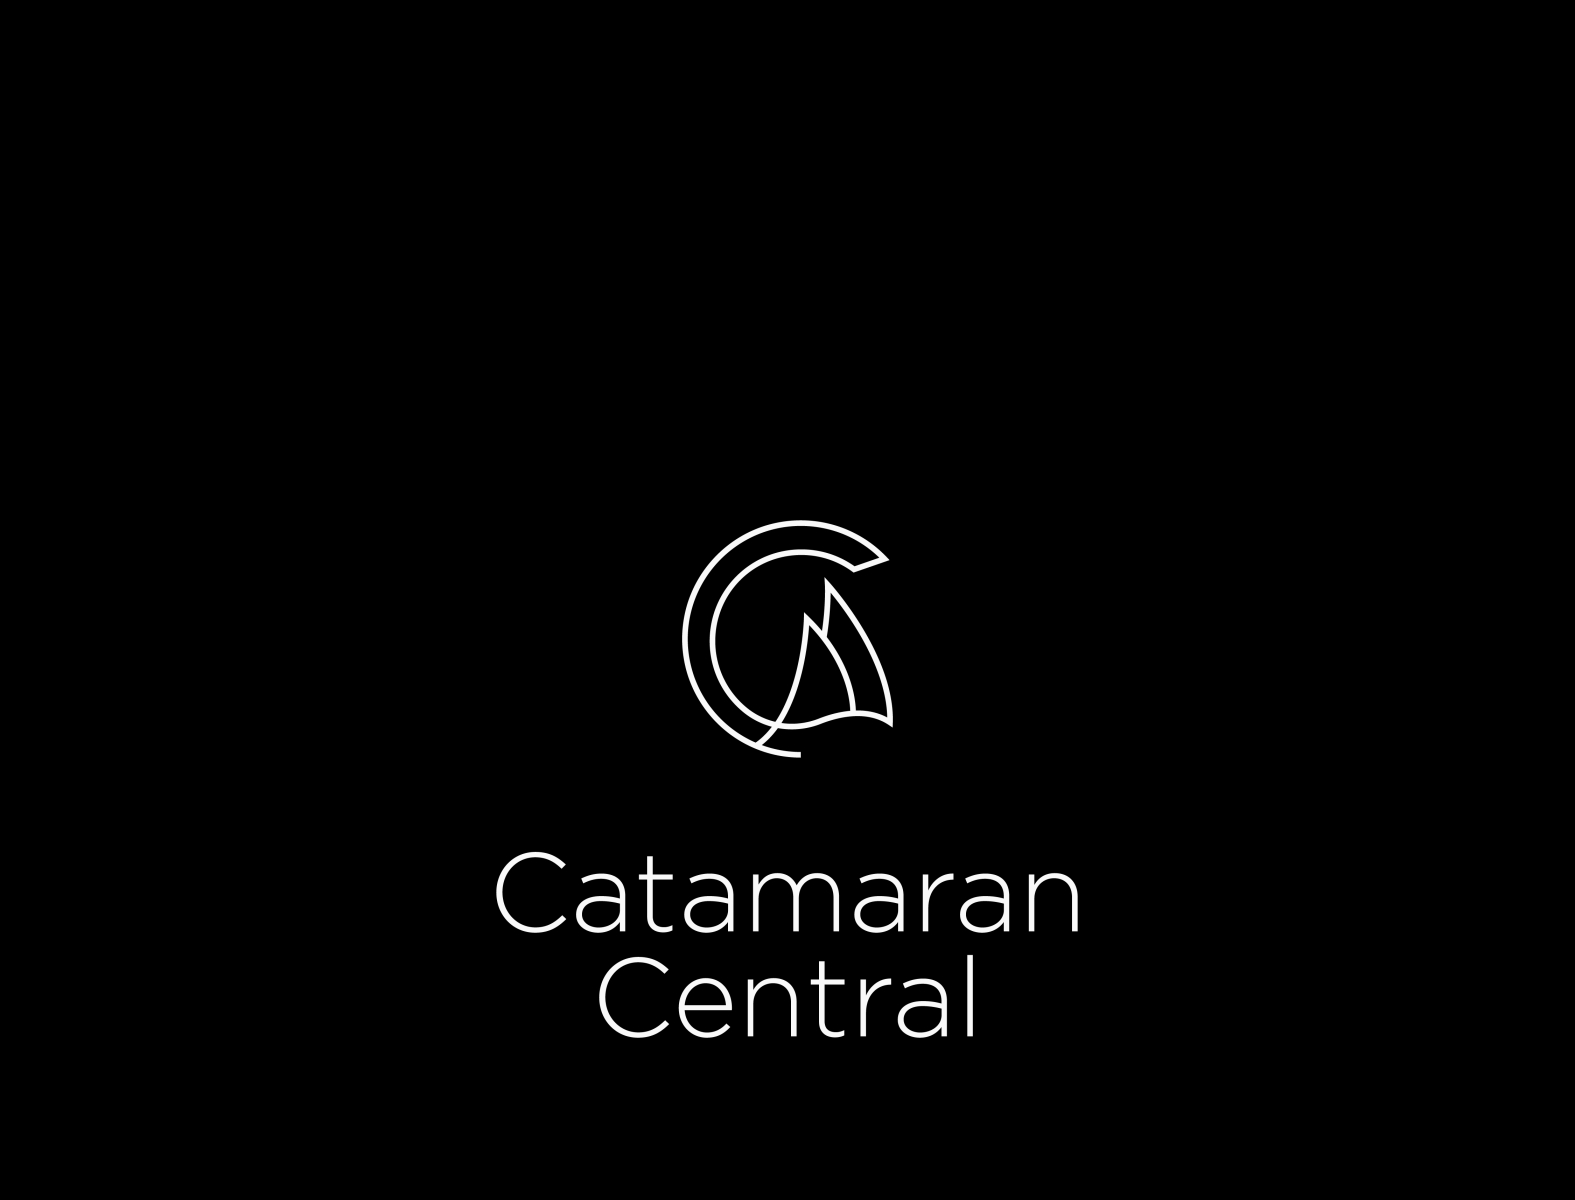 catamaran central by MD Faysal on Dribbble